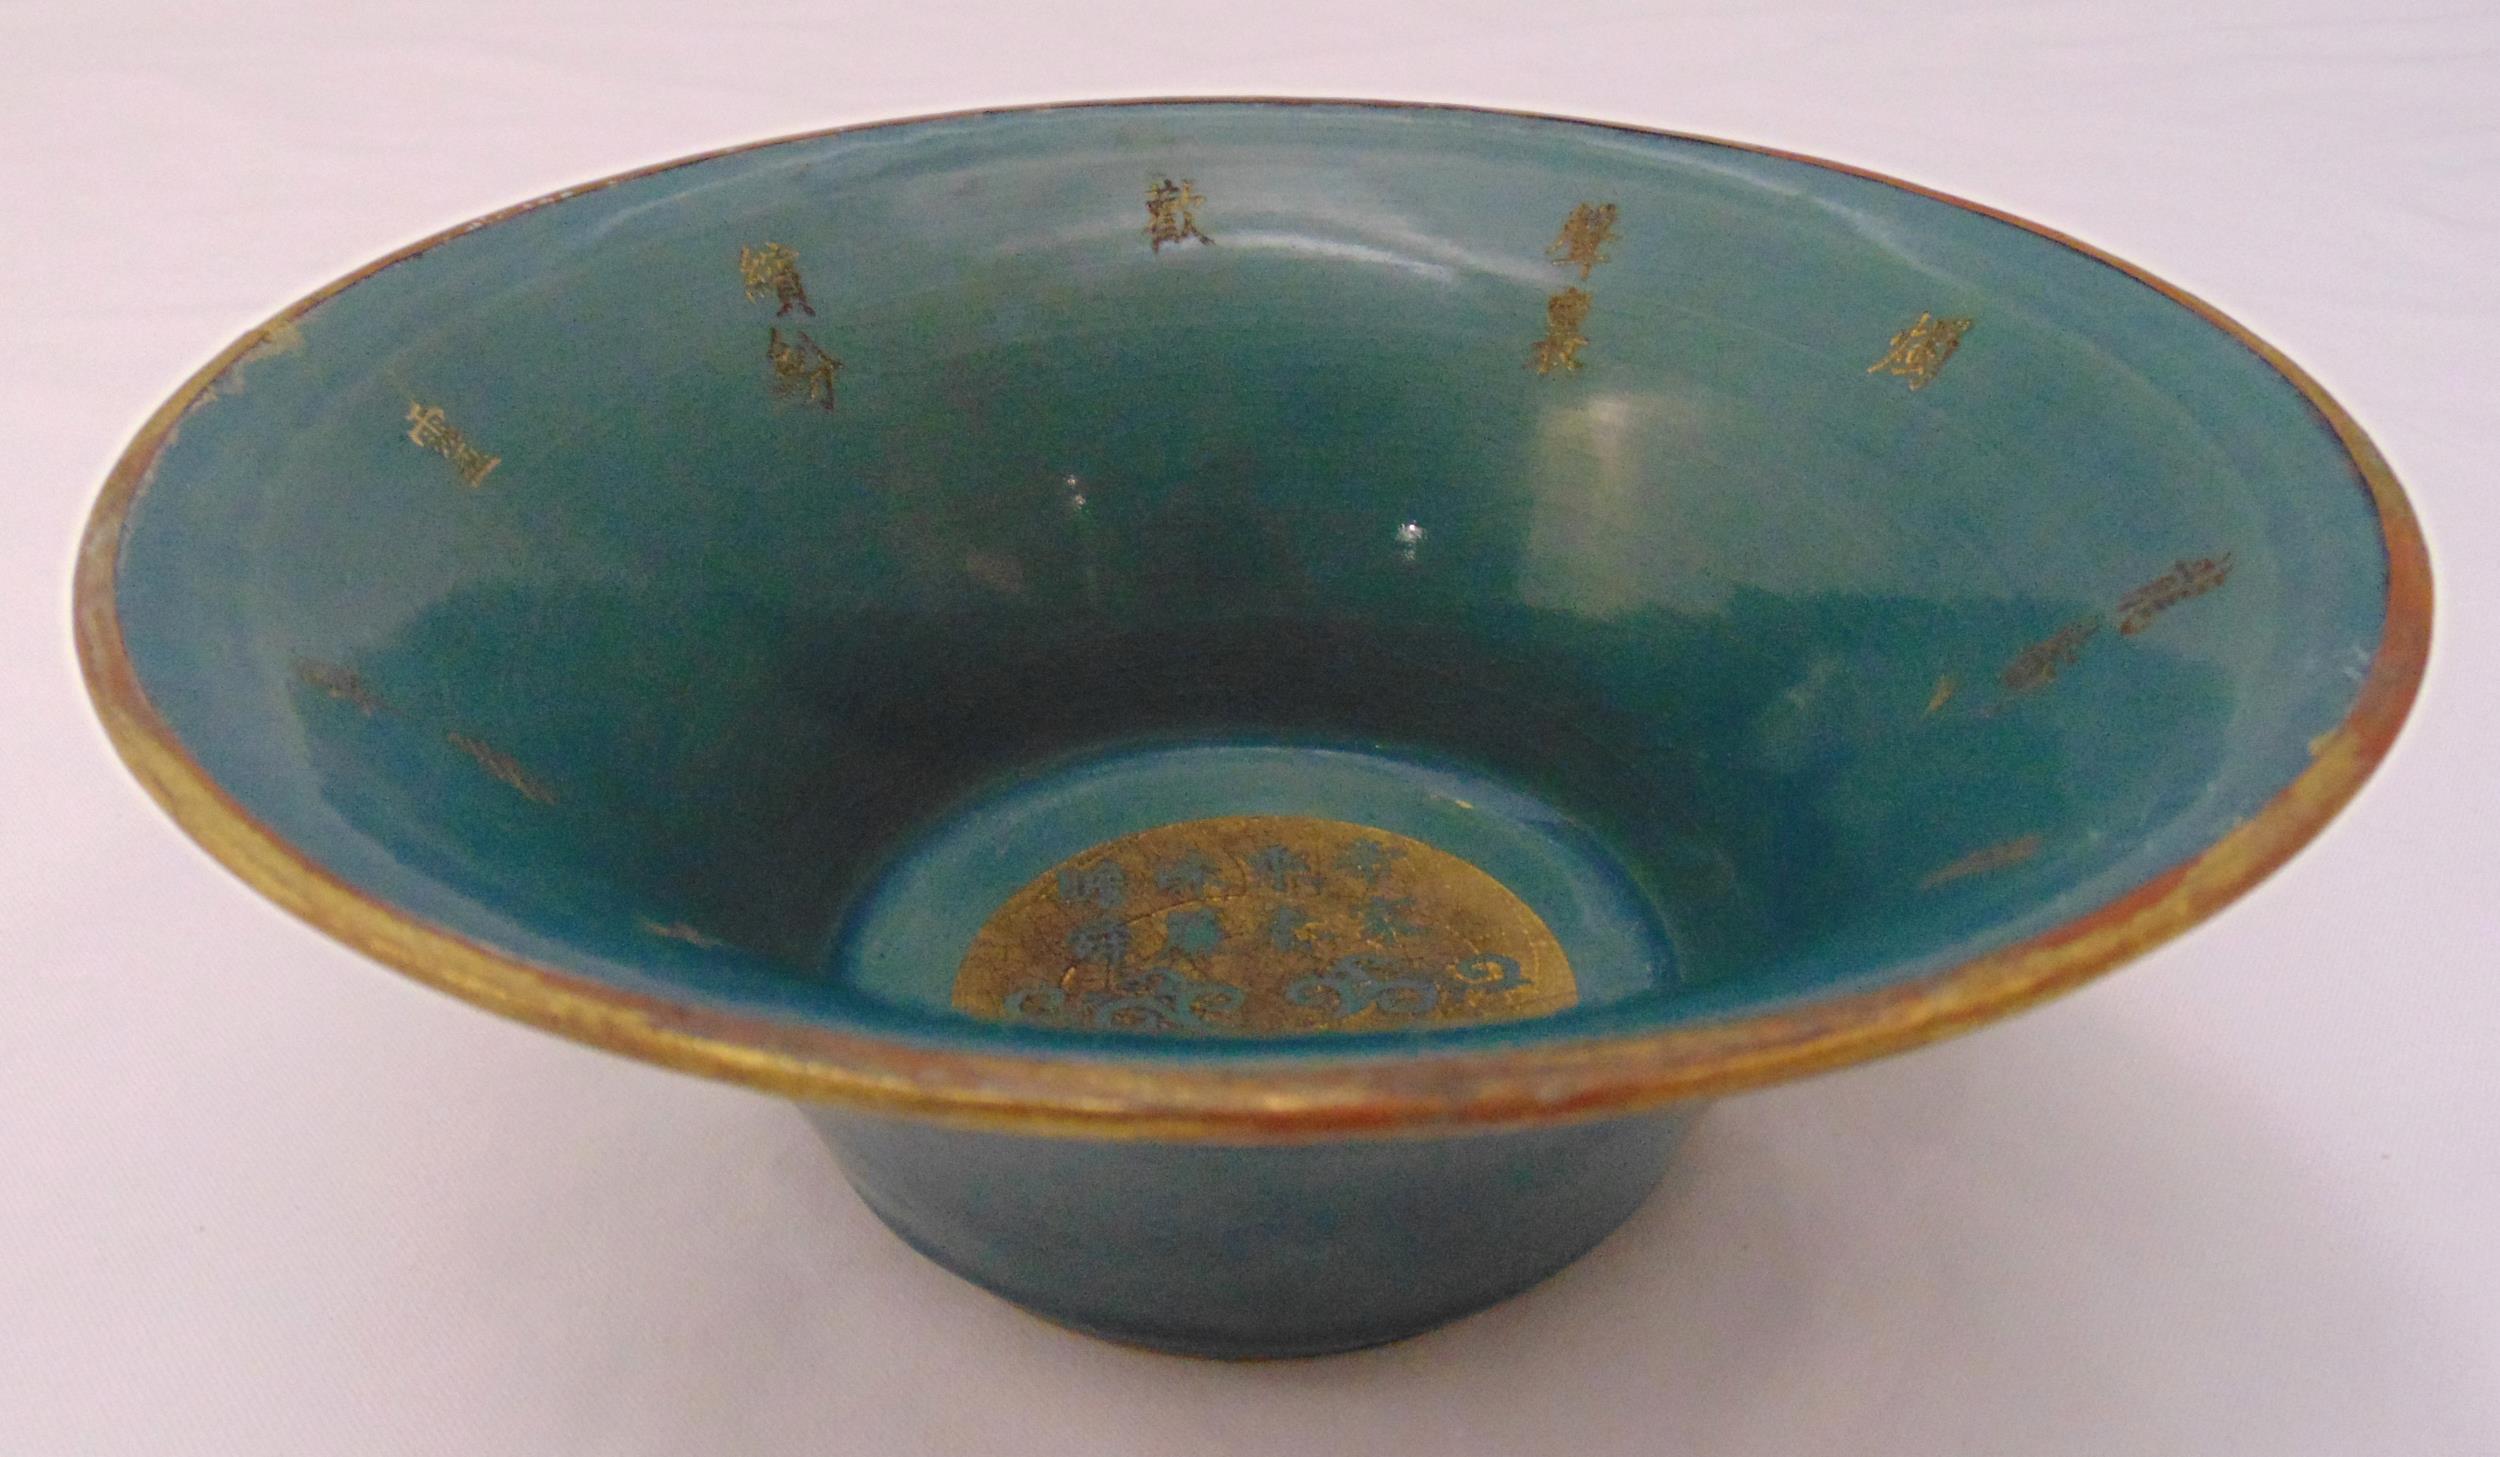 A Chinese archaic bowl with gilt characters and border, 21.5cm (d)